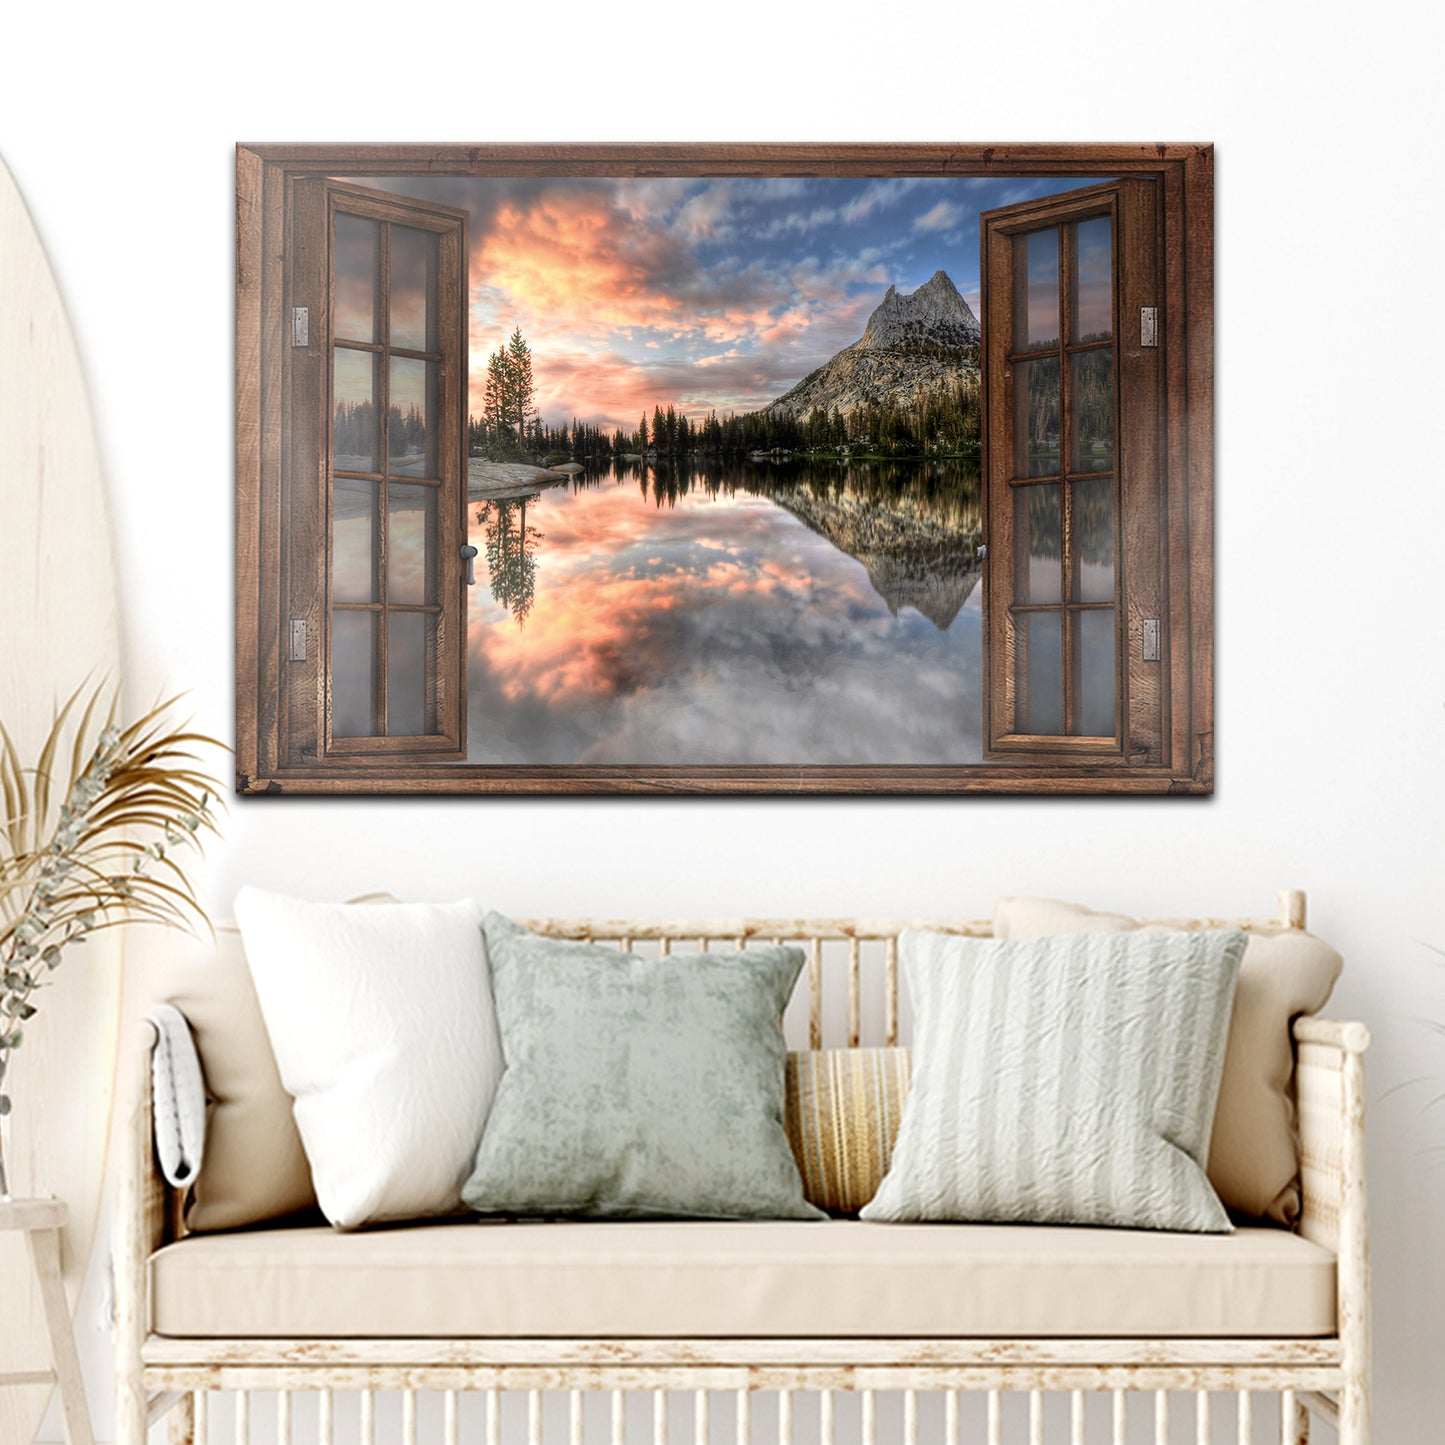 Calming Lake Scenery Style 3 - Image by Tailored Canvases